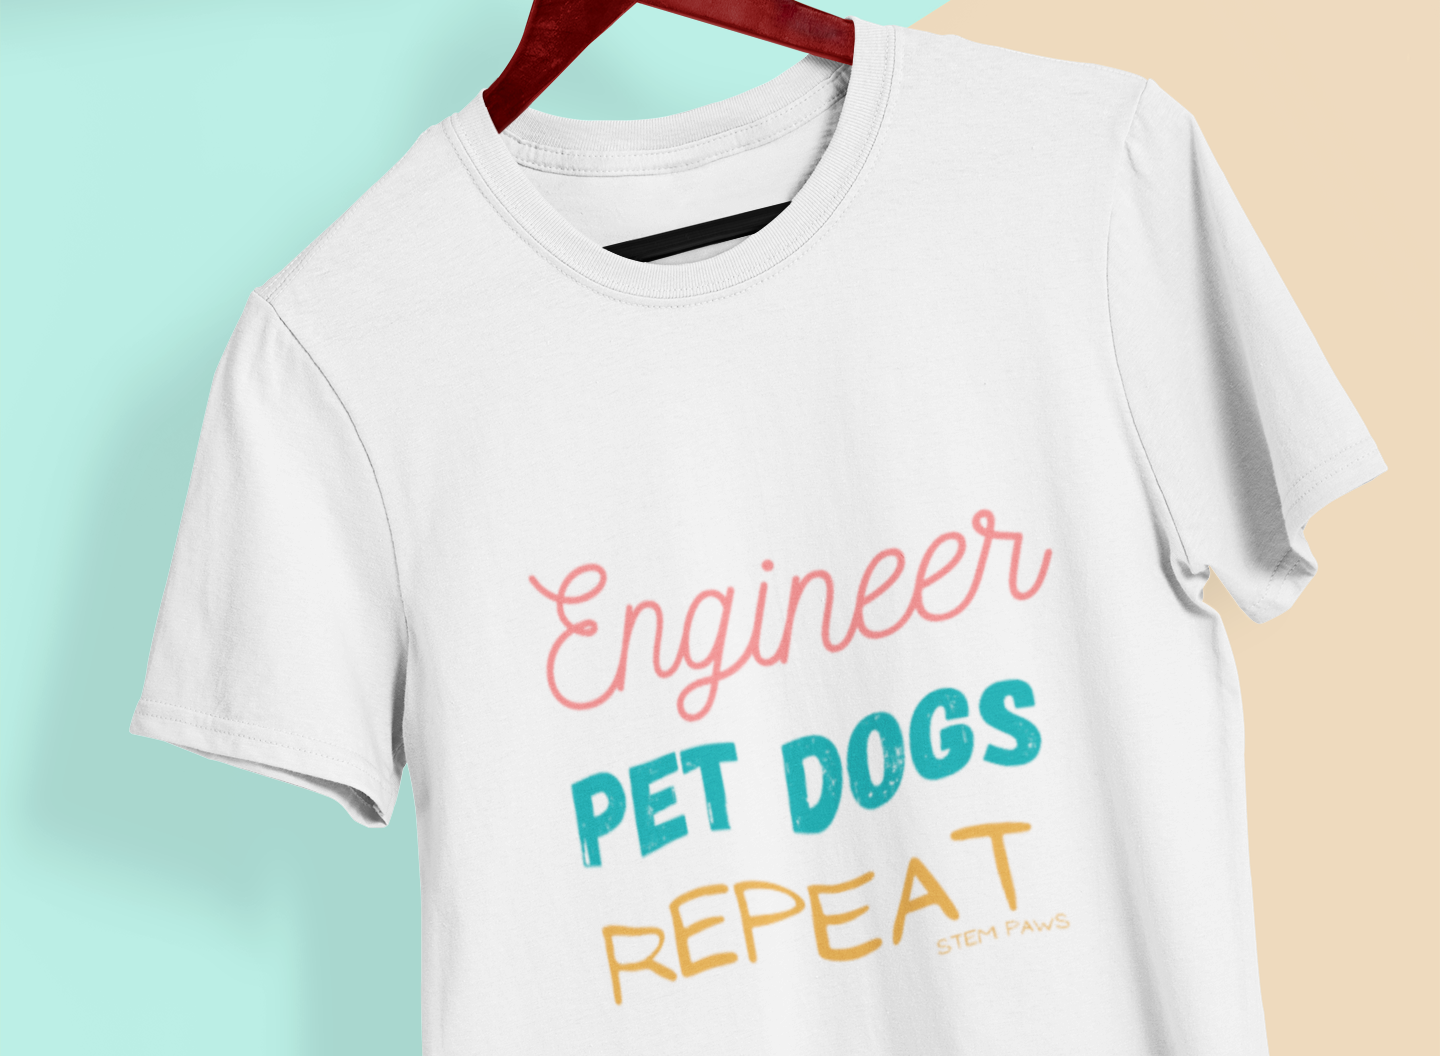 035014401056282-mockup-of-a-hand-holding-a-t-shirt-in-a-colorful-background-26735-16727143514349.png